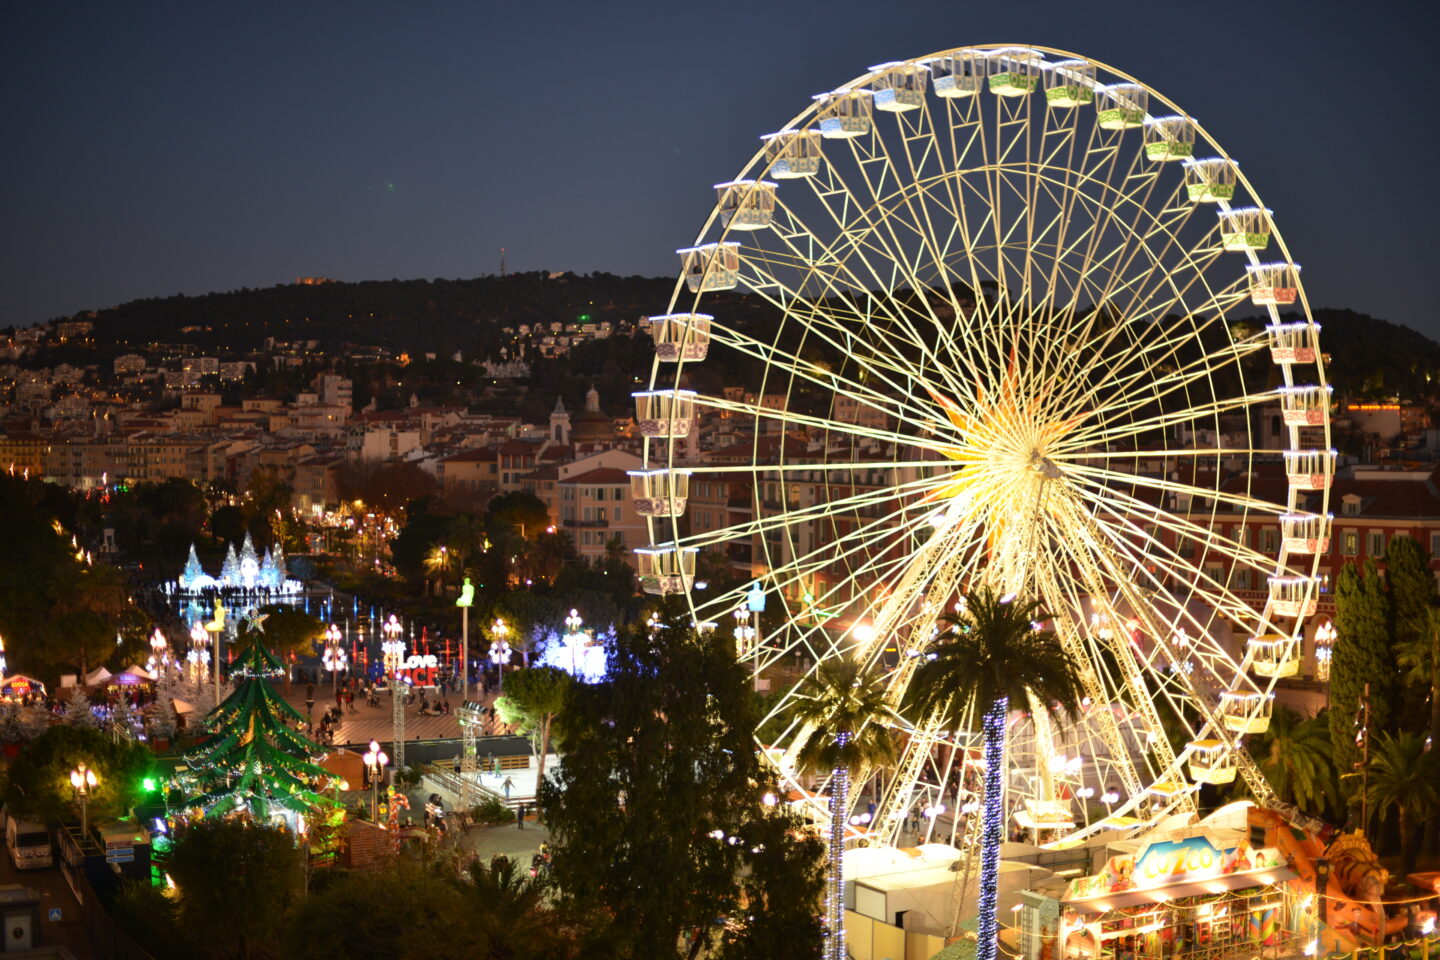 Visiting Nice, France, In The Winter: Nice Christmas Market